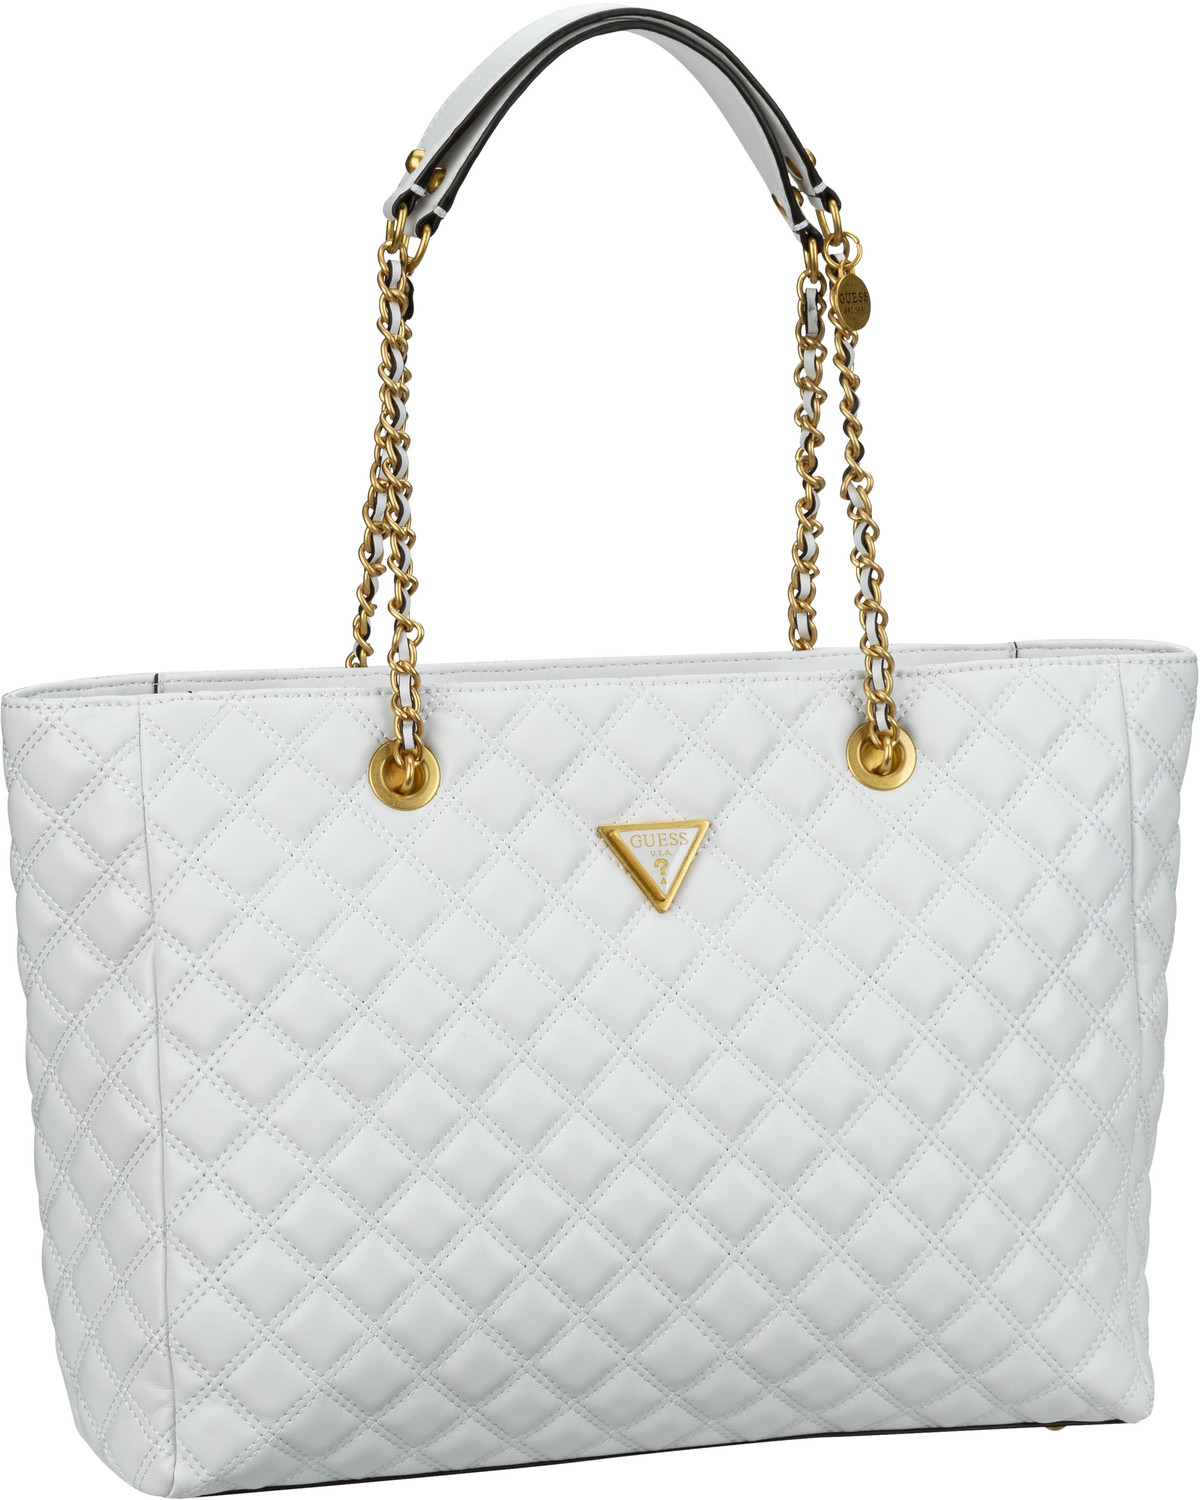 Guess Giully Tote - White